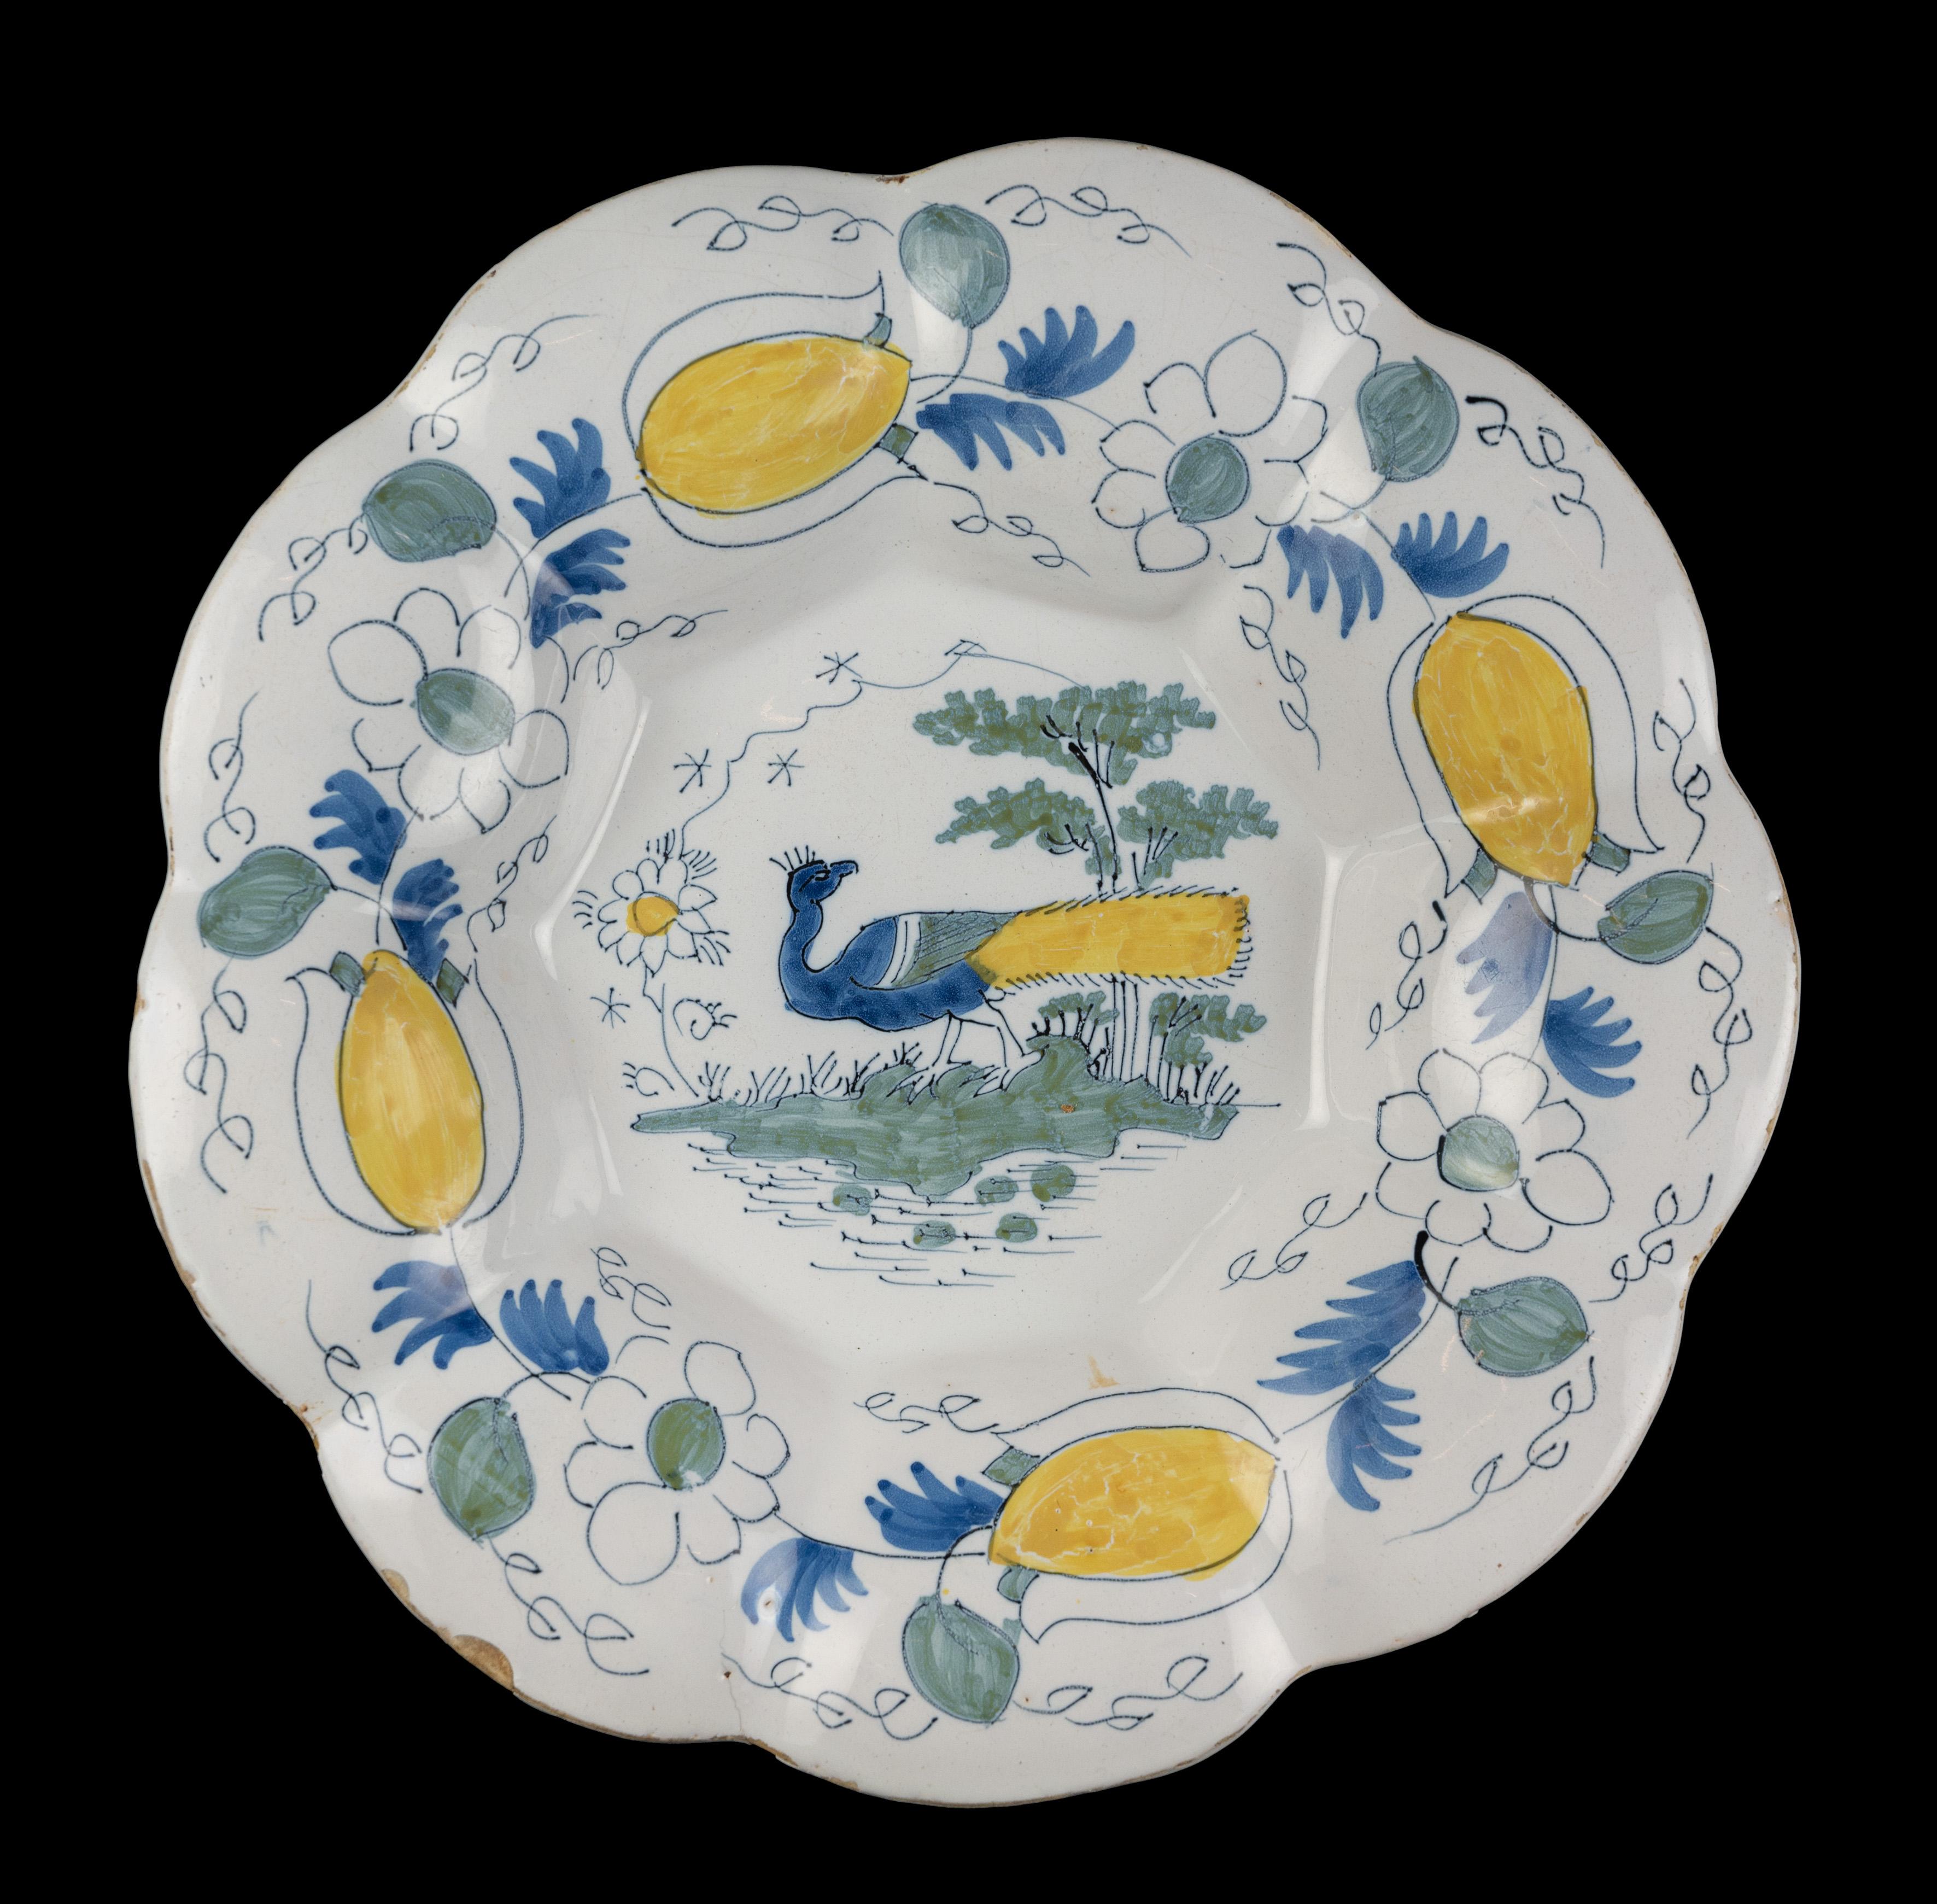 Polychrome lobed dish with peacock in landscape. Delft, circa 1690.
Dimensions: diameter 34,9 cm / 13.74 in. 

The polychrome lobed dish is composed of nine wide lobes and is painted in the centre with a peacock in a water landscape with plans